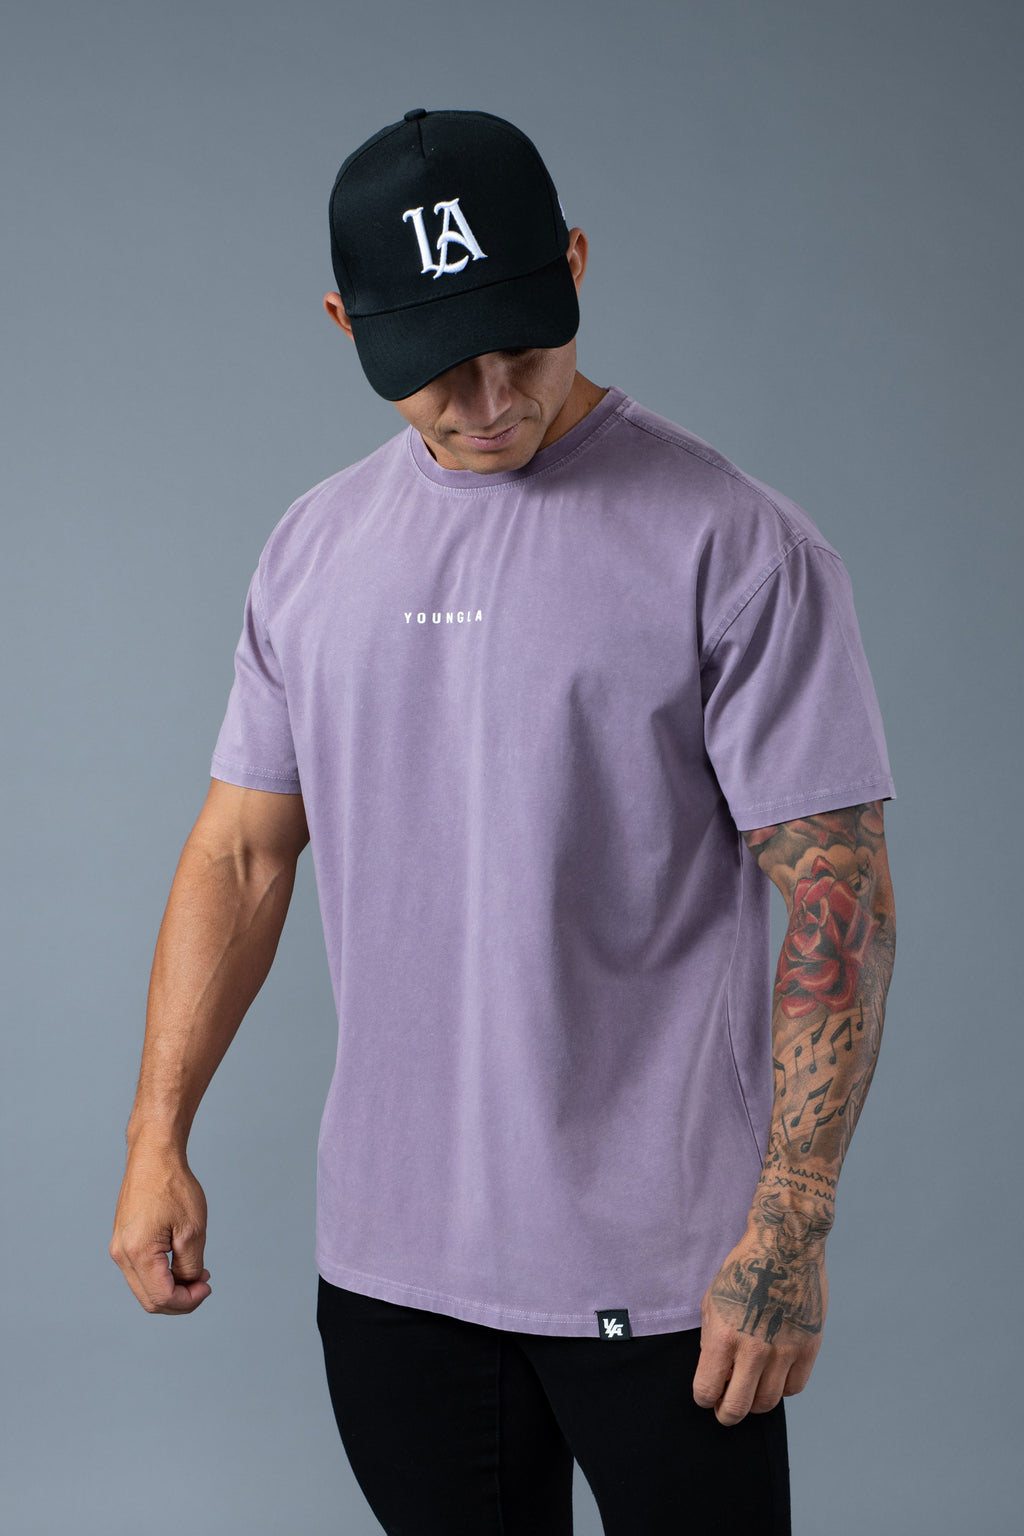 Buy Discount Mens Young LA Shirts - 421 Corduroy Supersized Tees